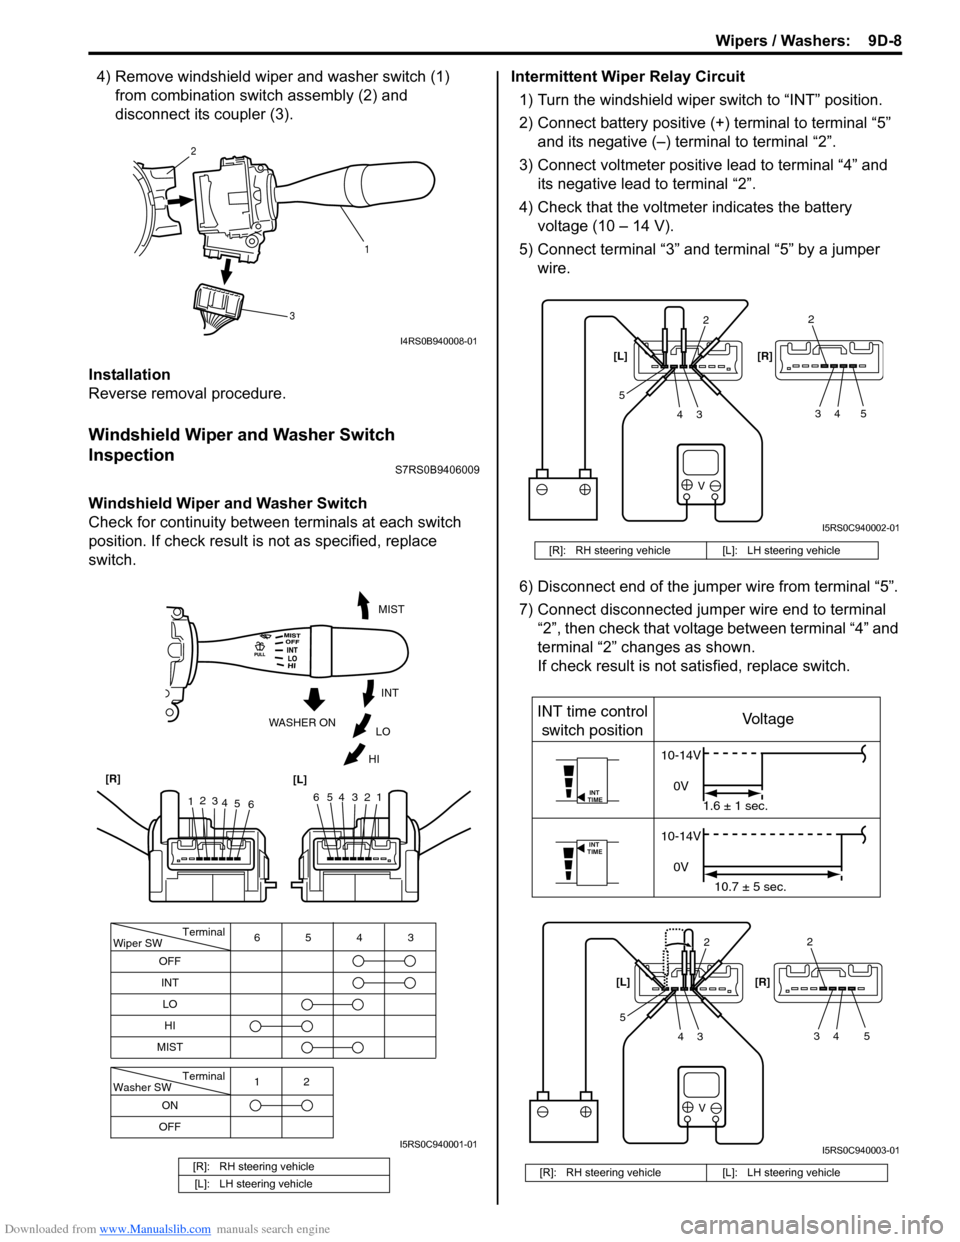 SUZUKI SWIFT 2004 2.G Service Workshop Manual Downloaded from www.Manualslib.com manuals search engine Wipers / Washers:  9D-8
4) Remove windshield wiper and washer switch (1) from combination swit ch assembly (2) and 
disconnect its coupler (3).